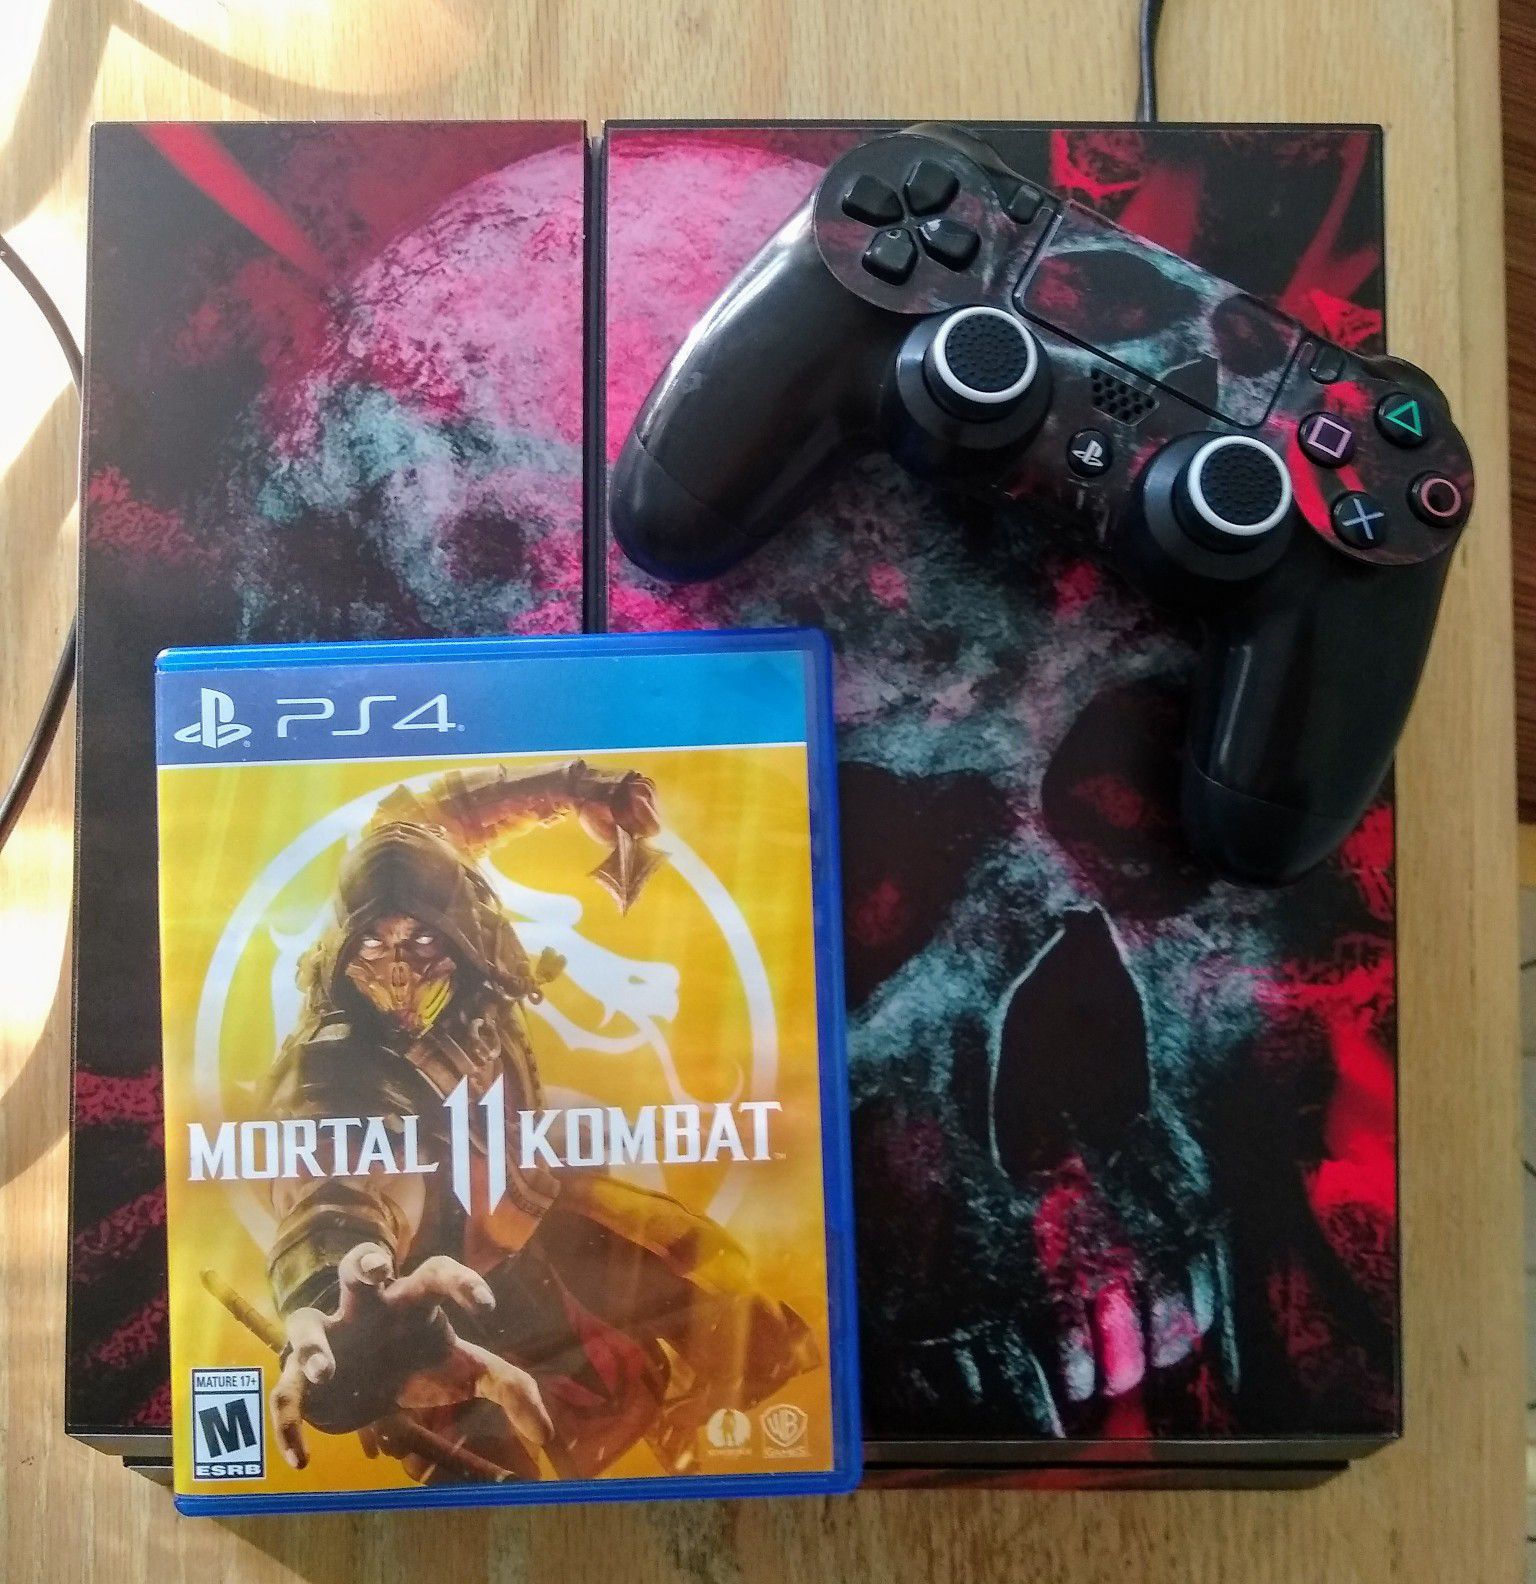 Ps4 complete Skull cover, with one controller cables and one game MK11